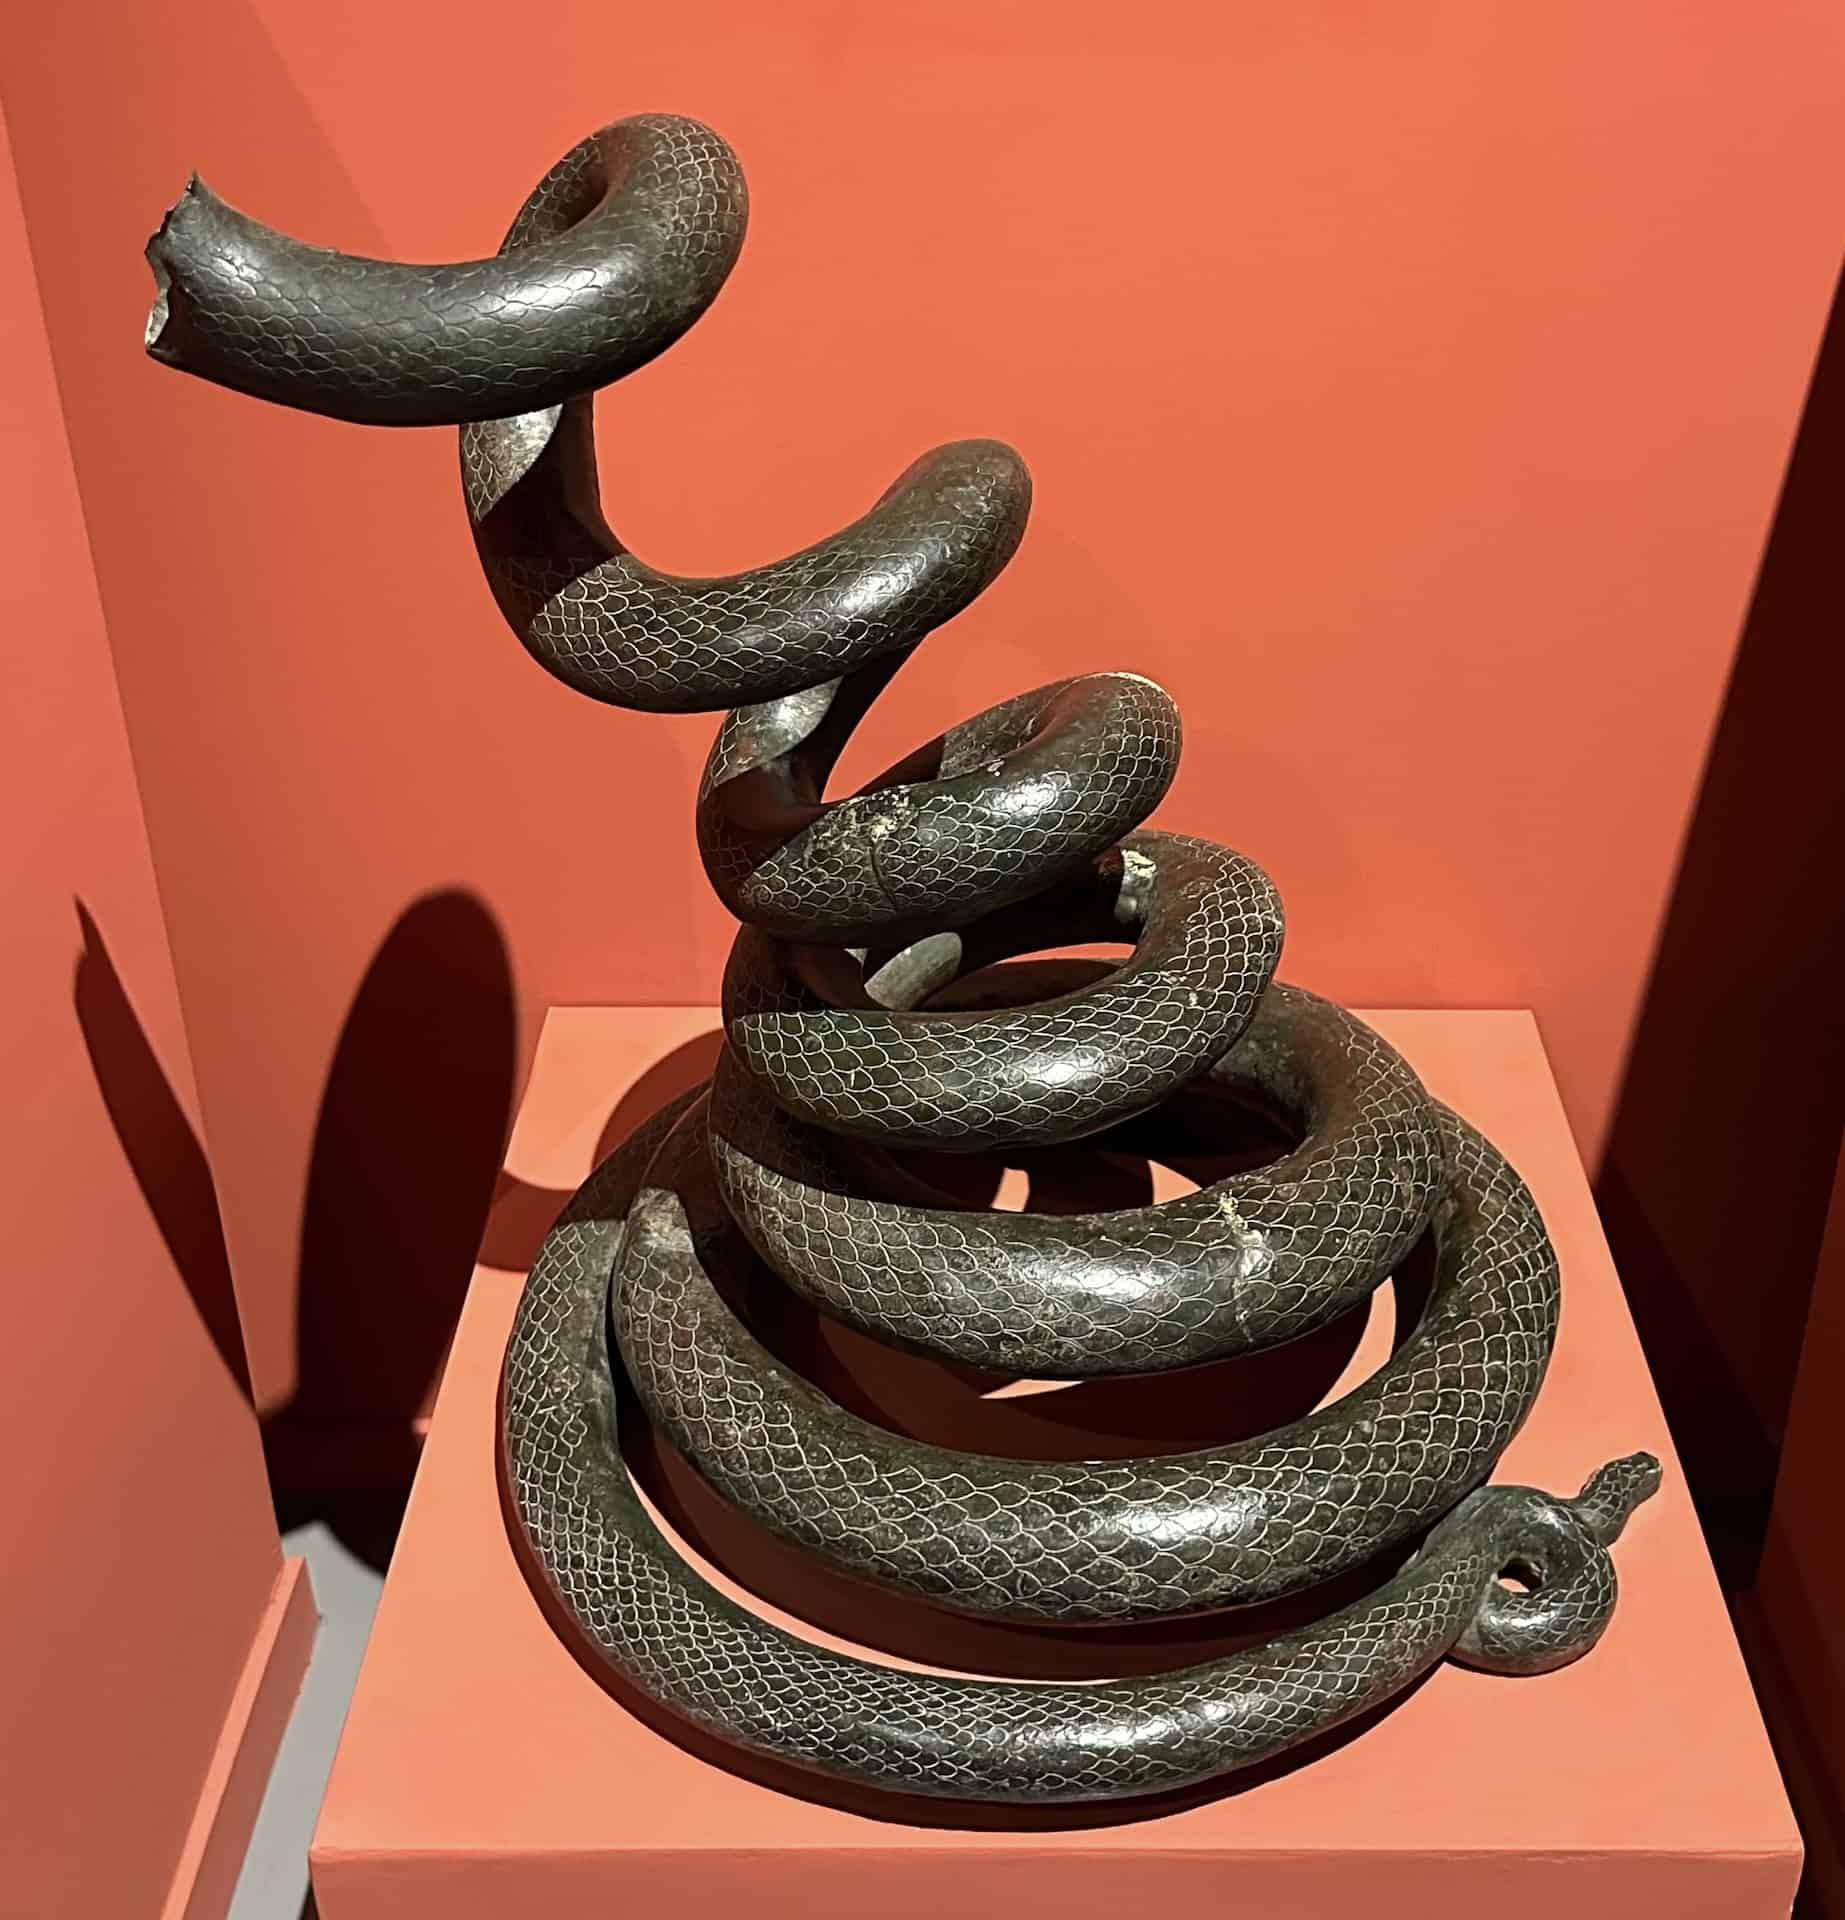 Bronze snake found in Dwelling Unit 7 (1st century) in the Hall of the Terrace Houses Findings at the Ephesus Museum in Selçuk, Turkey